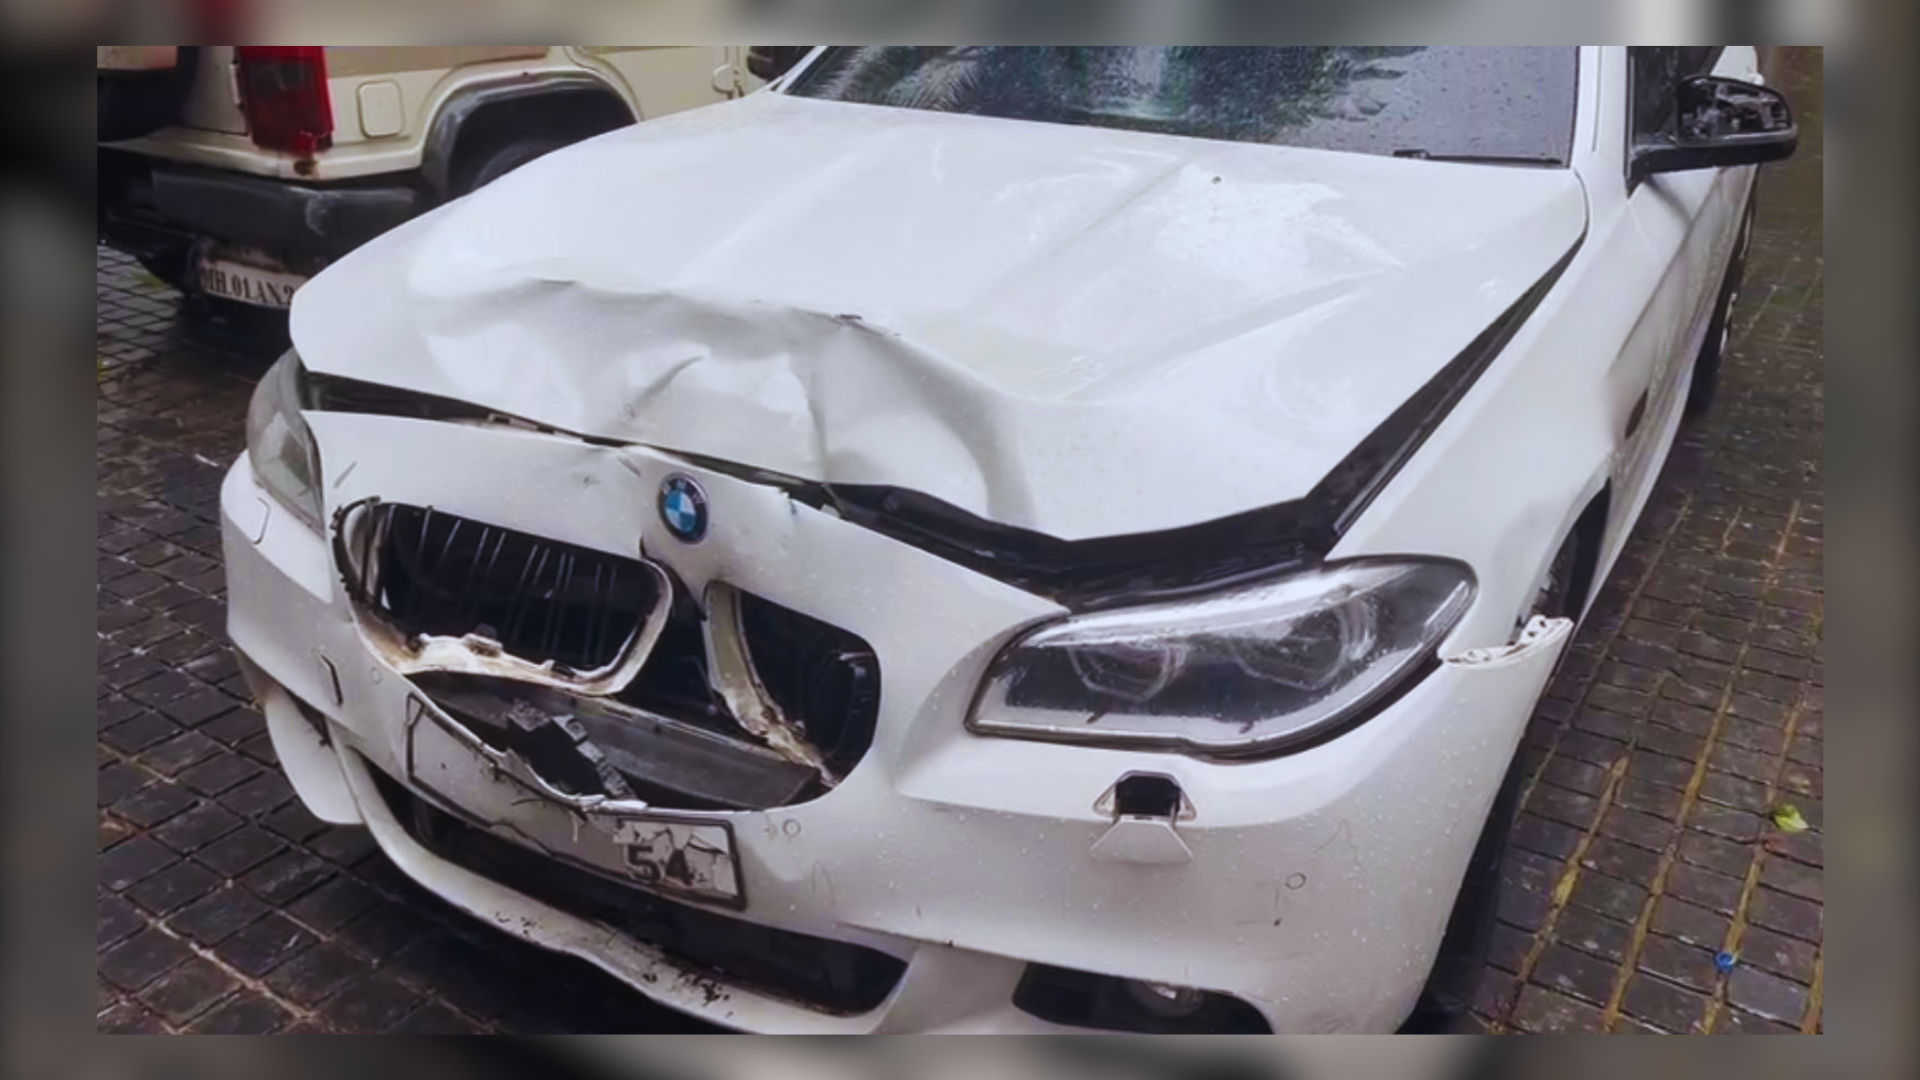 Woman Killed, Husband Injured In BMW Car Collision, Political Leader’s Son Involved In Hit-and-Run